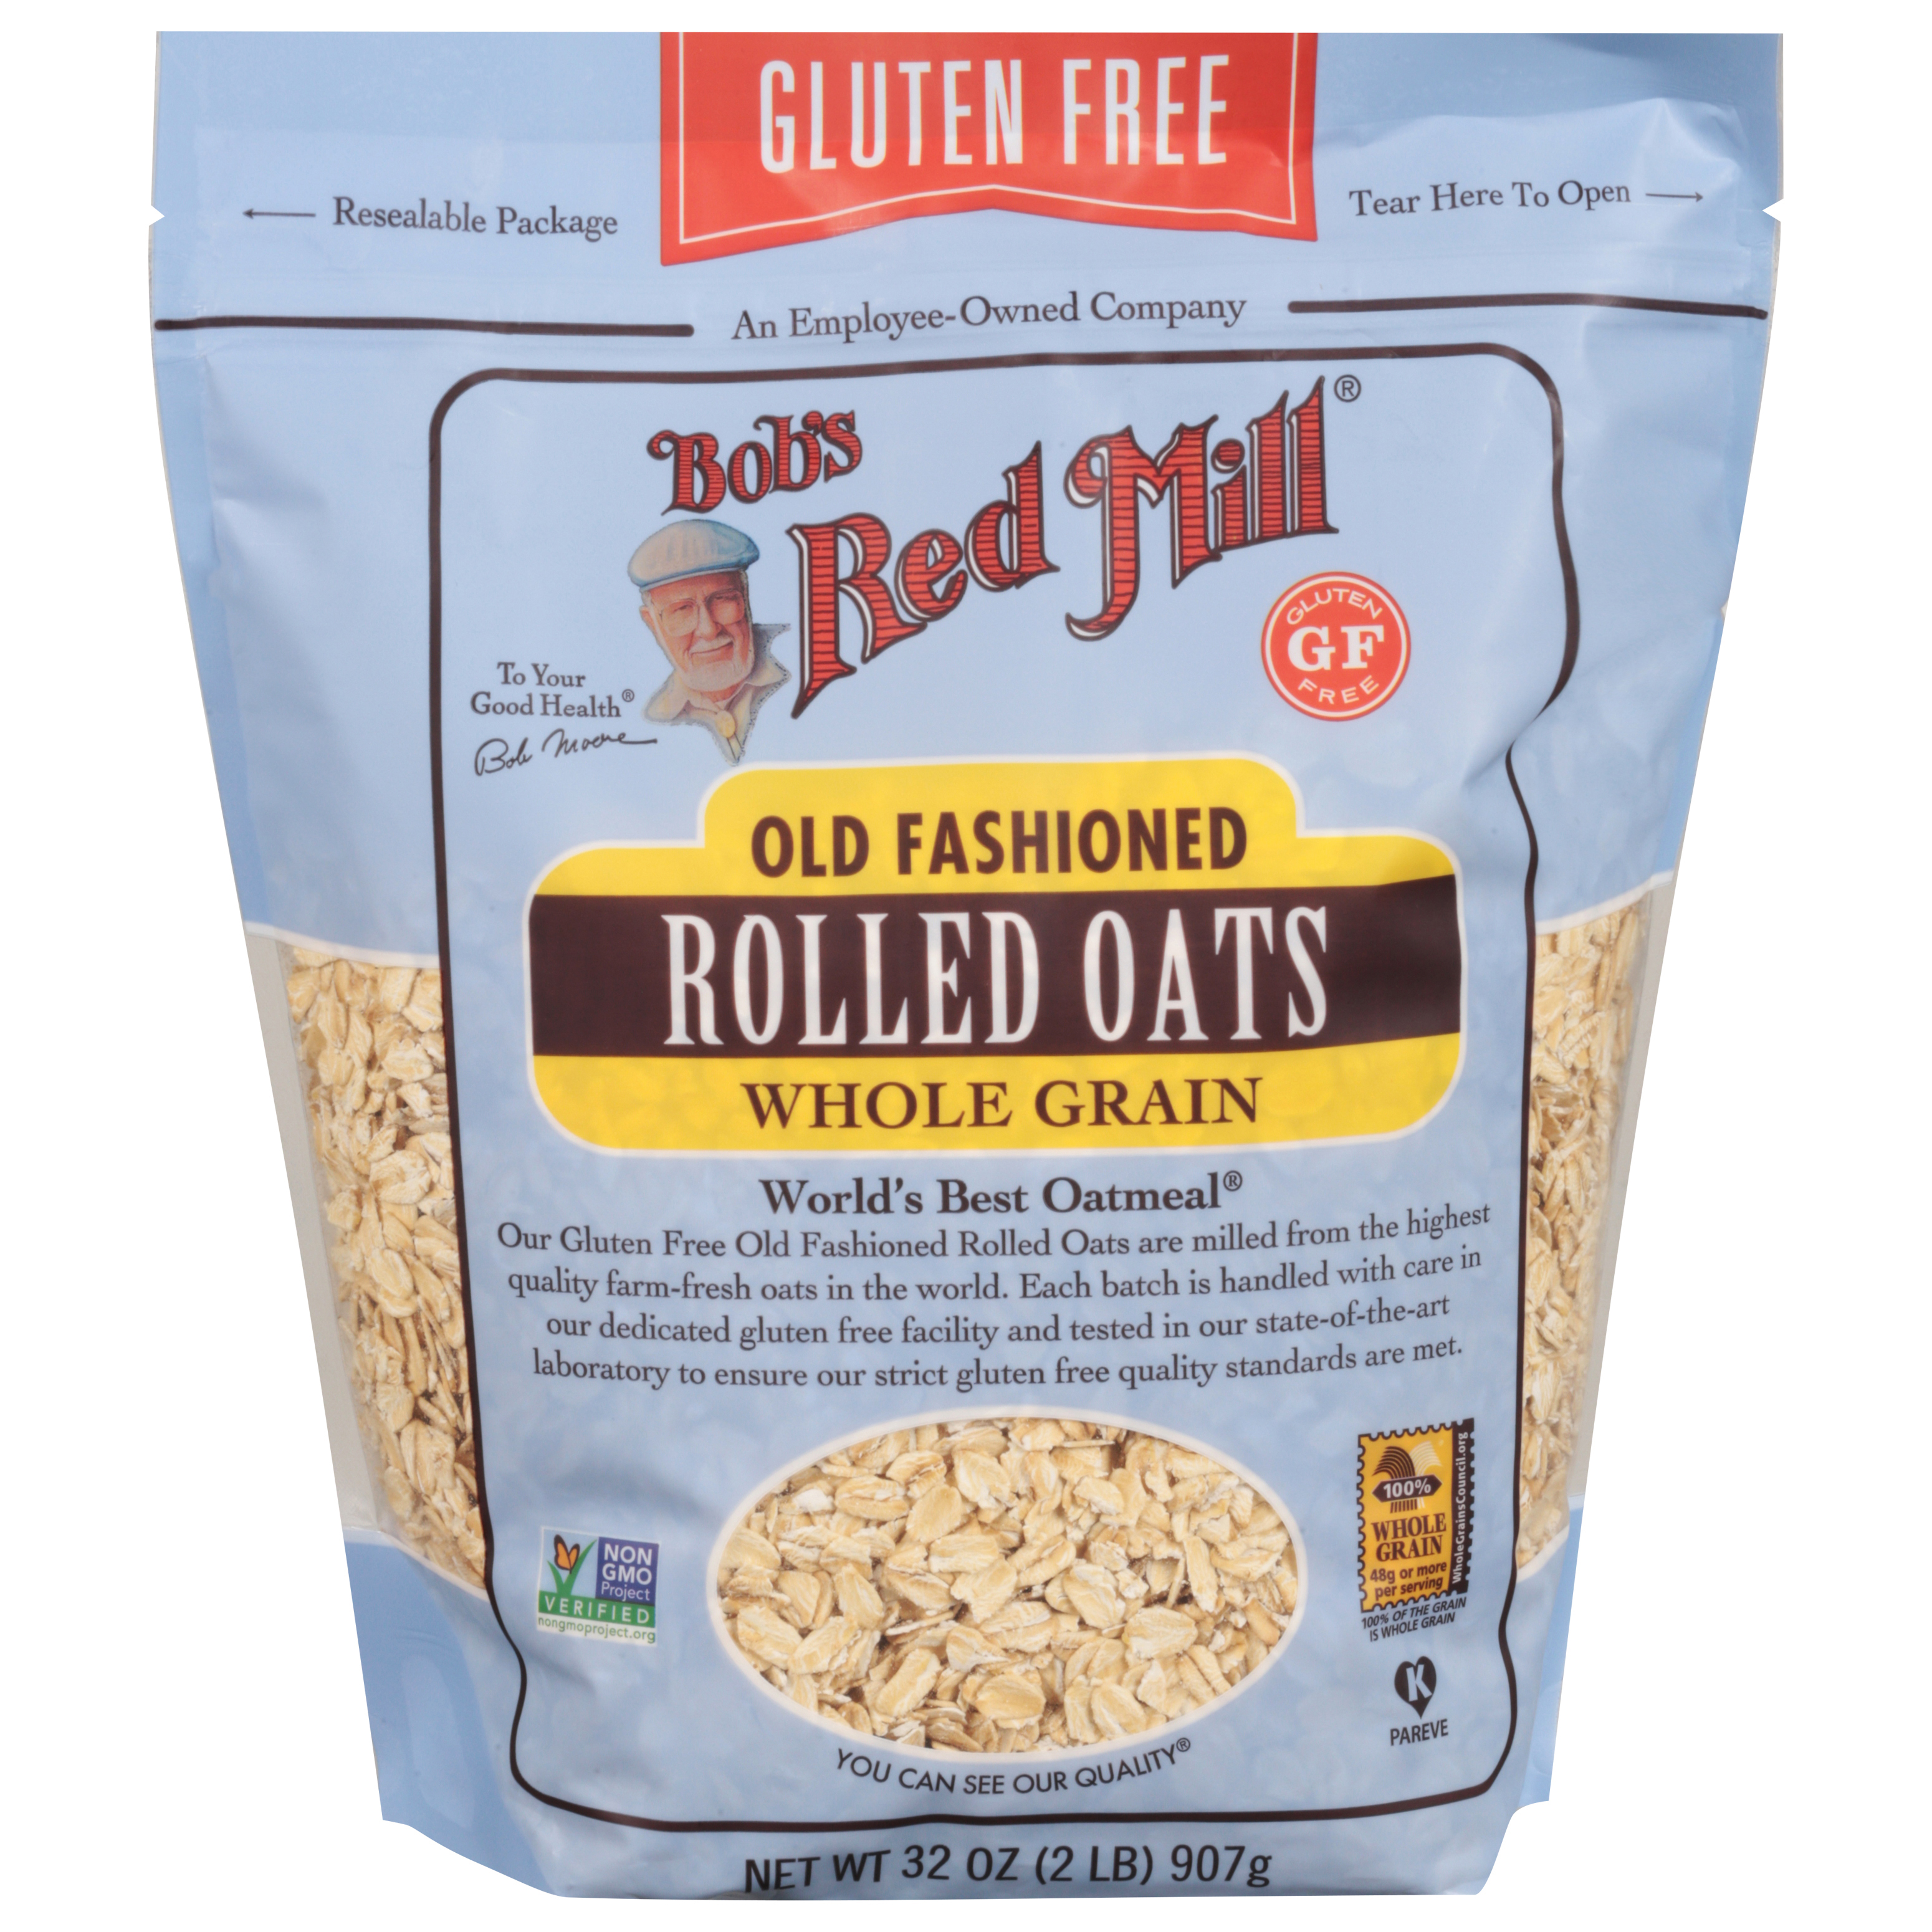 Bob's Red Mill Gluten Free Non-GMO Old Fashioned Rolled Oats, 32 oz Bag Shelf-Stable Ready-to-Cook - image 1 of 6